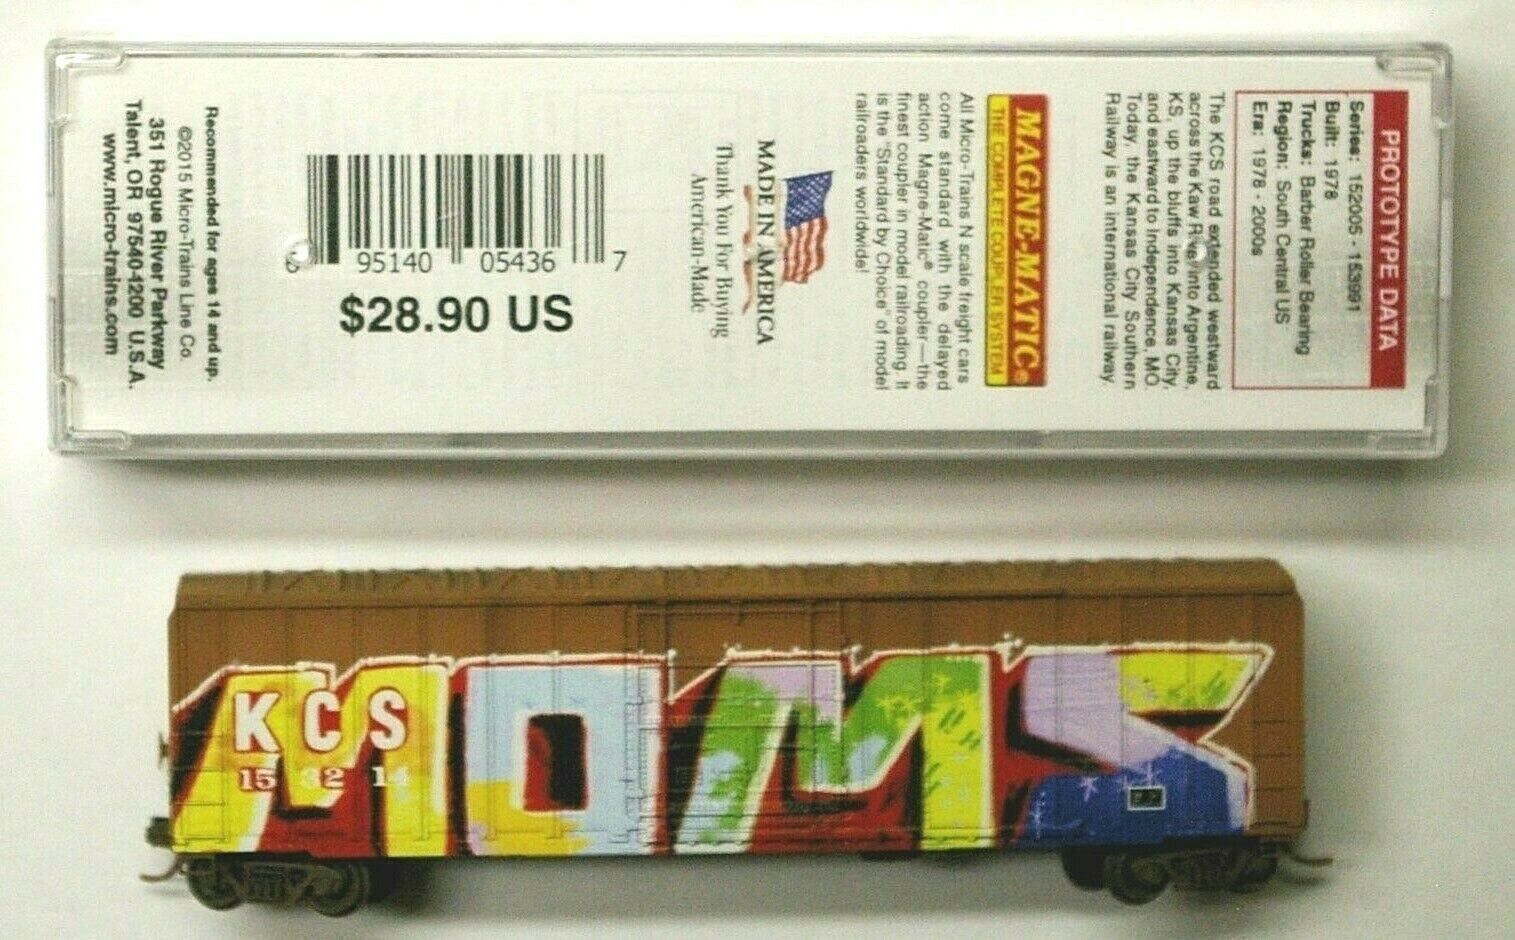 Mtl Micro-trains 27190 Kcs 153214 "mothers Day" Fw Factory Weathered